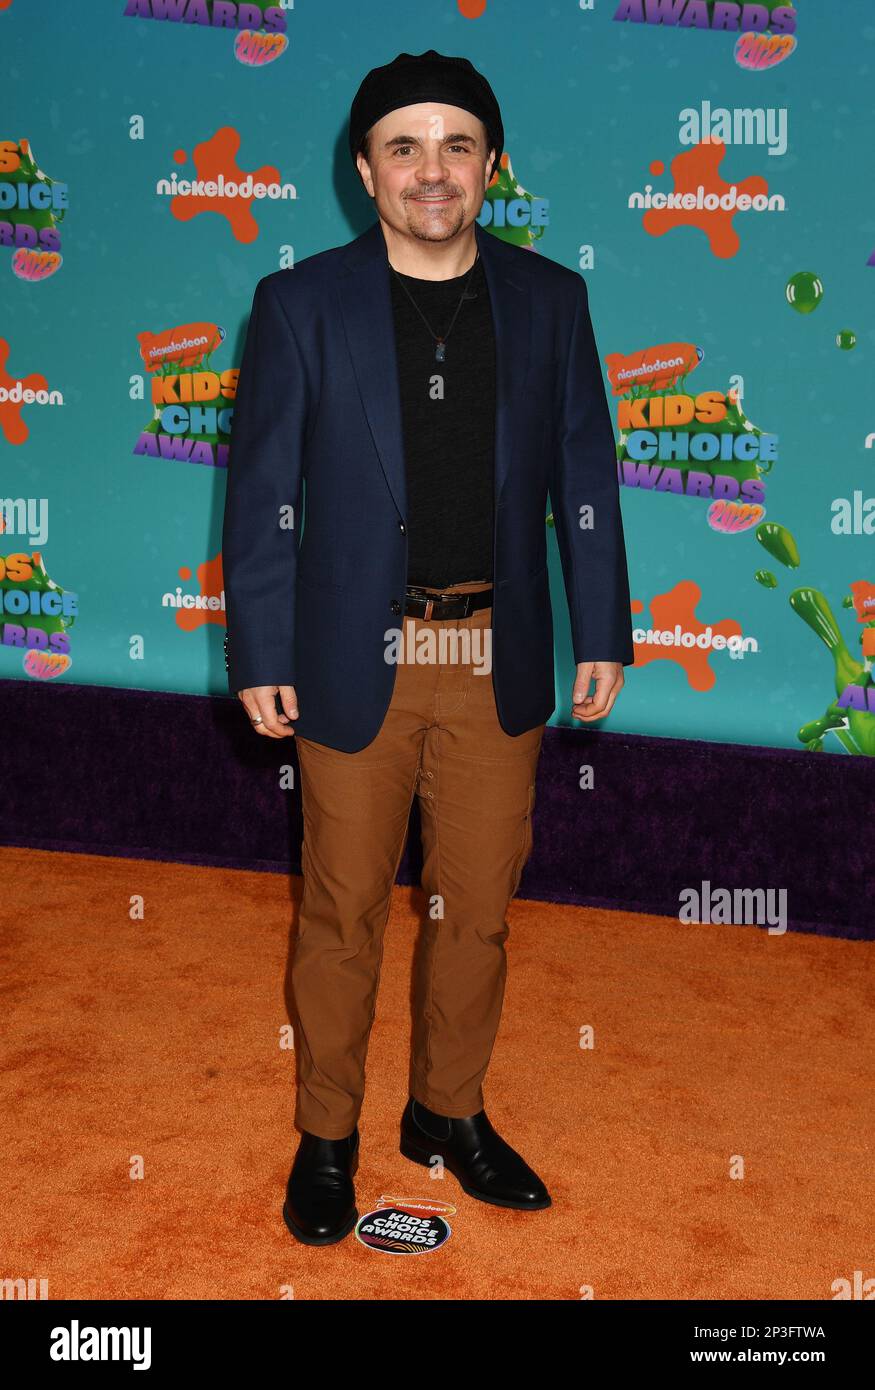 LOS ANGELES, CALIFORNIA - MARCH 04: Michael D. Cohen attends Nickelodeon's 2023 Kids' Choice Awards at Microsoft Theater on March 04, 2023 in Los Ange Stock Photo